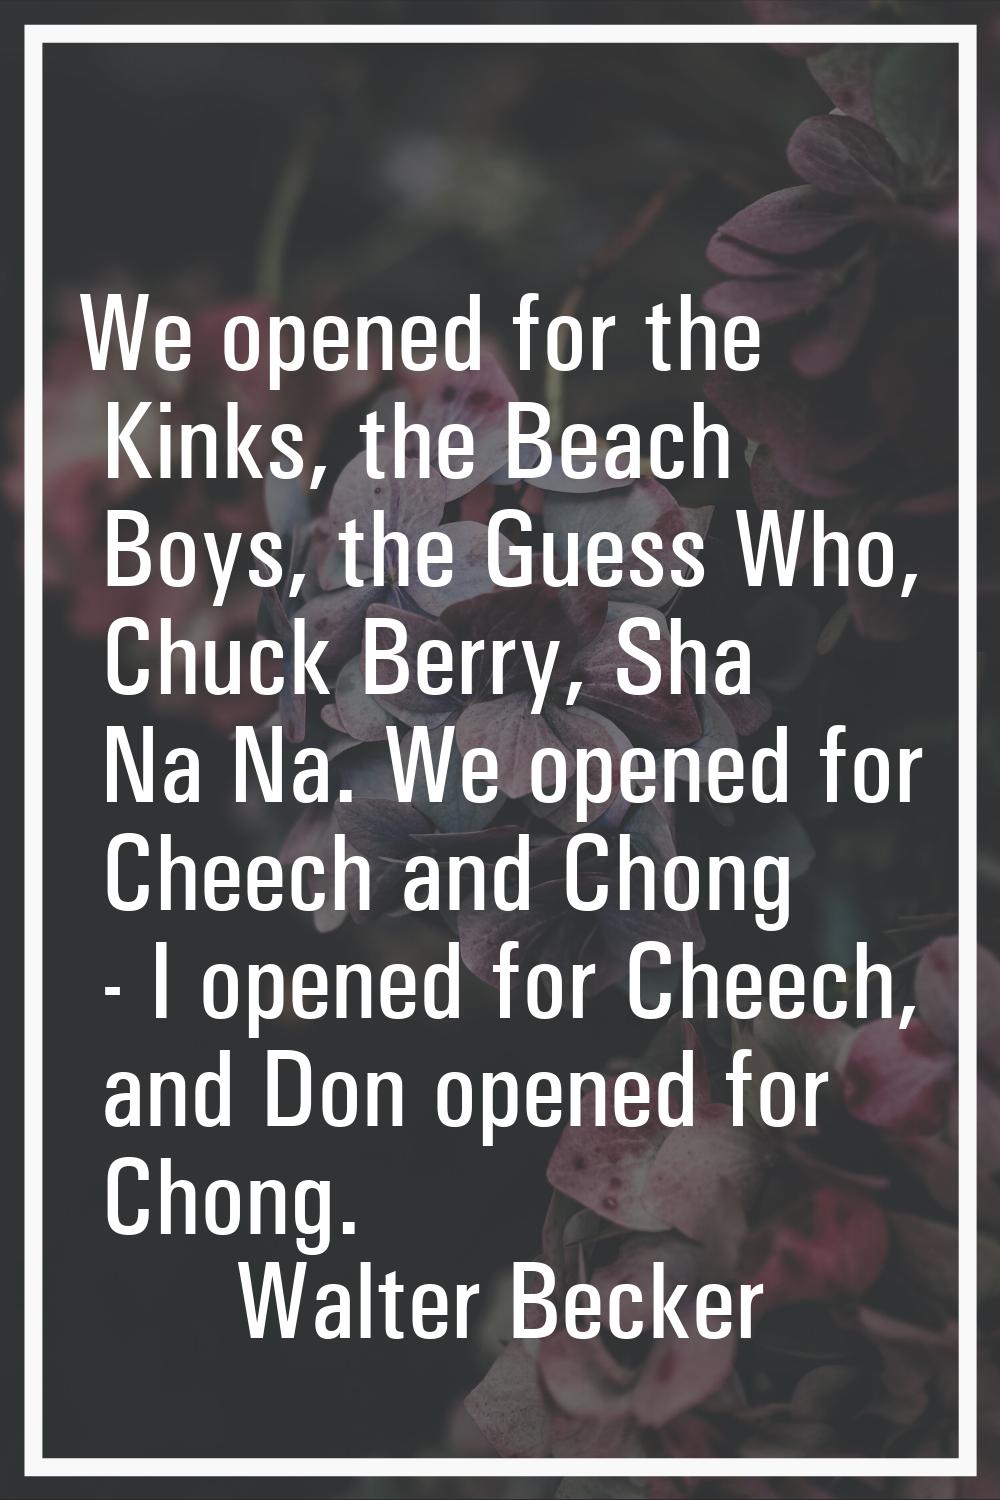 We opened for the Kinks, the Beach Boys, the Guess Who, Chuck Berry, Sha Na Na. We opened for Cheec